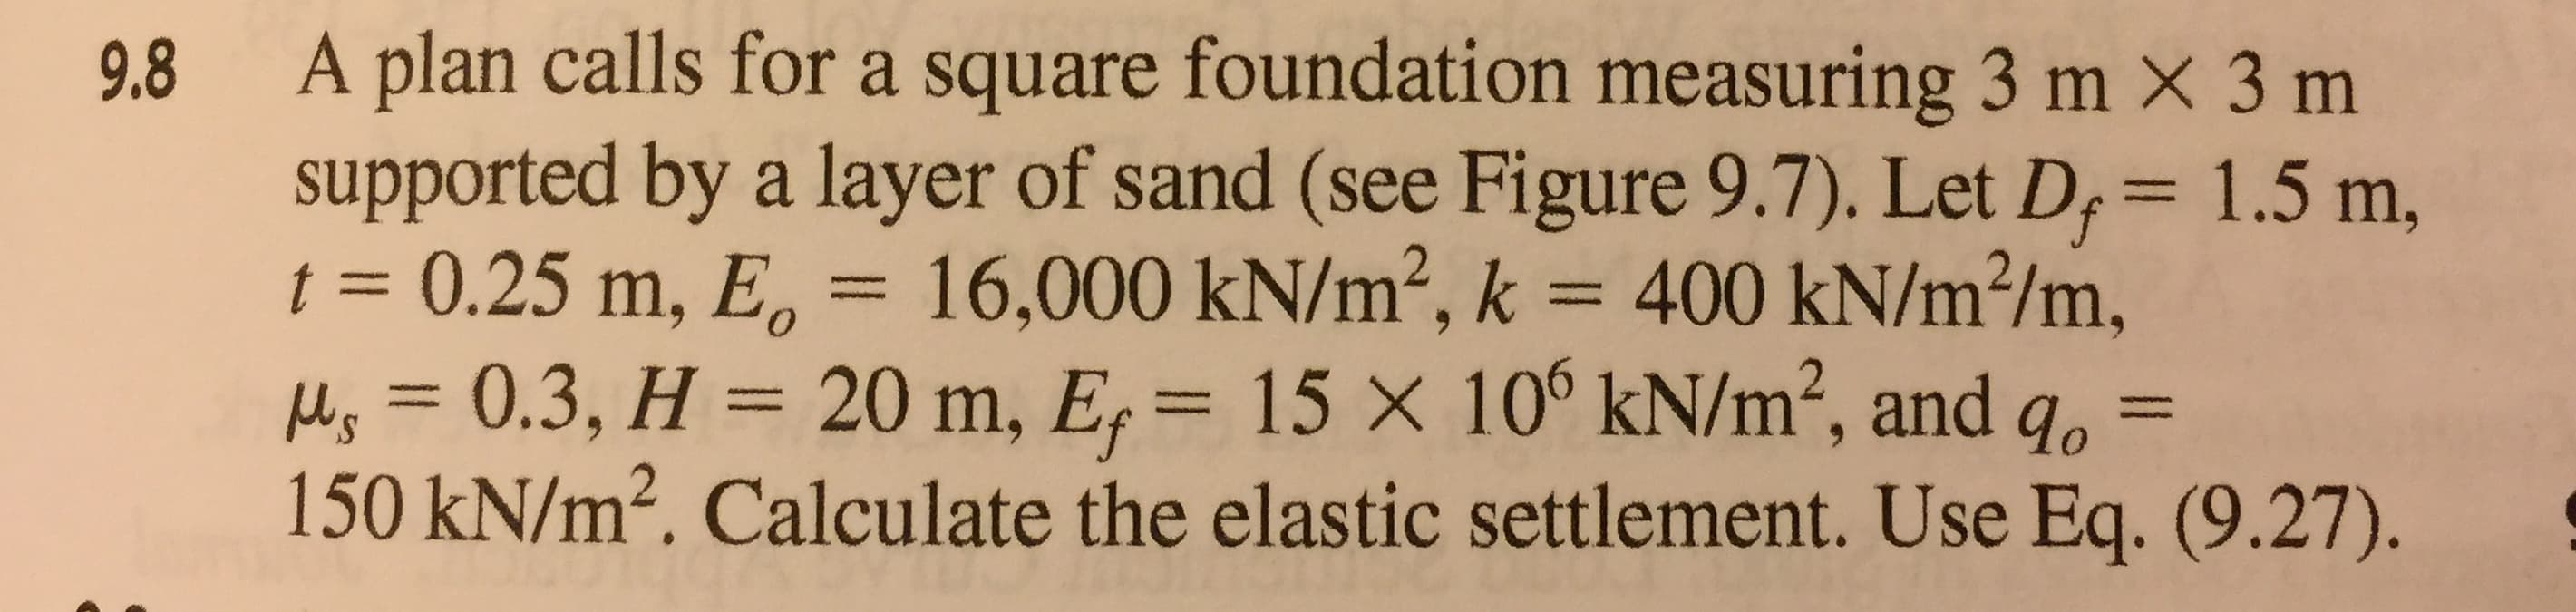 9.8 A plan calls for a square foundation measuring 3 m x 3 m
supported by a layer of sand (see Figure 9.7). Let D, 1.5 m,
t 0.25 m, E 16,000 kN/m2, k 400 kN/m2/m,
, 0.3, H 20 m, E 15 X 10° kN/m2, and go-
150 kN/m2. Calculate the elastic settlement. Use Eq. (9.27).
